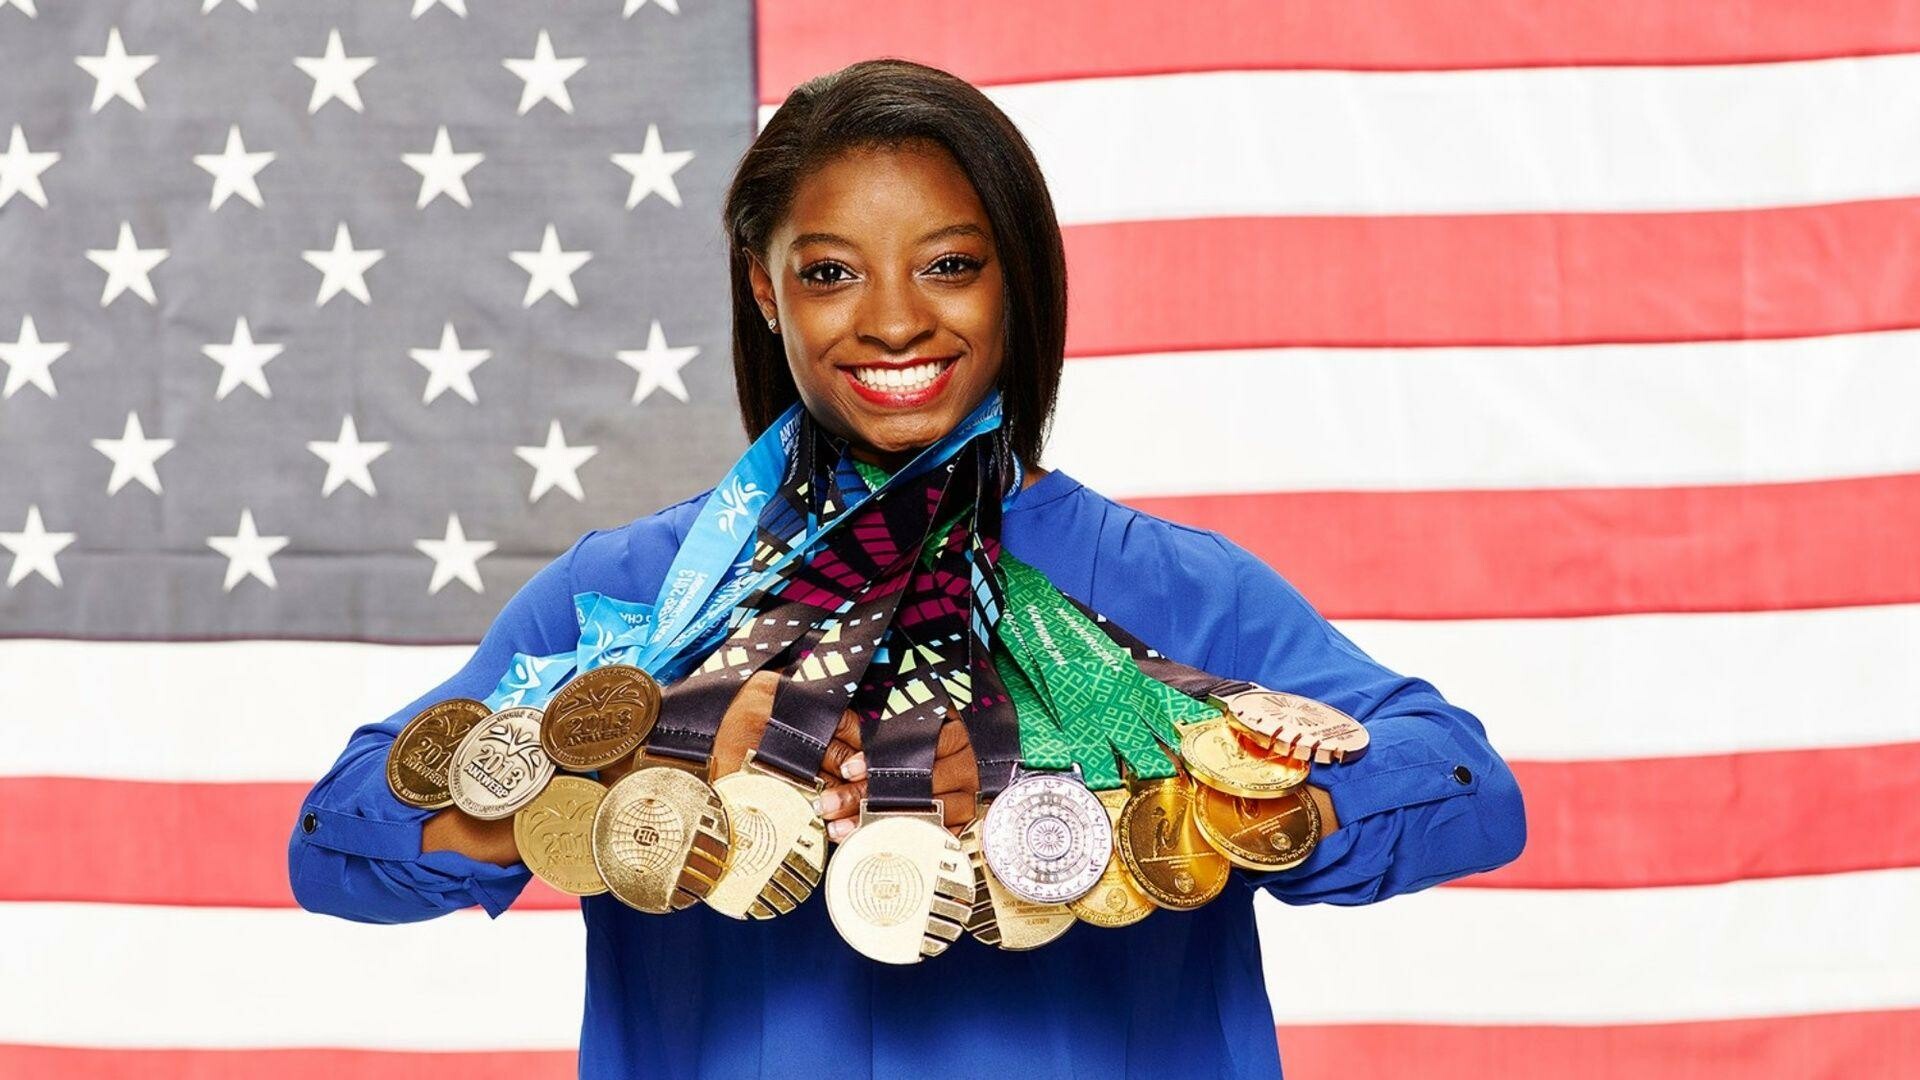 Simone Biles: She placed first in the all-around at the 2019 US World Championships trials. 1920x1080 Full HD Background.